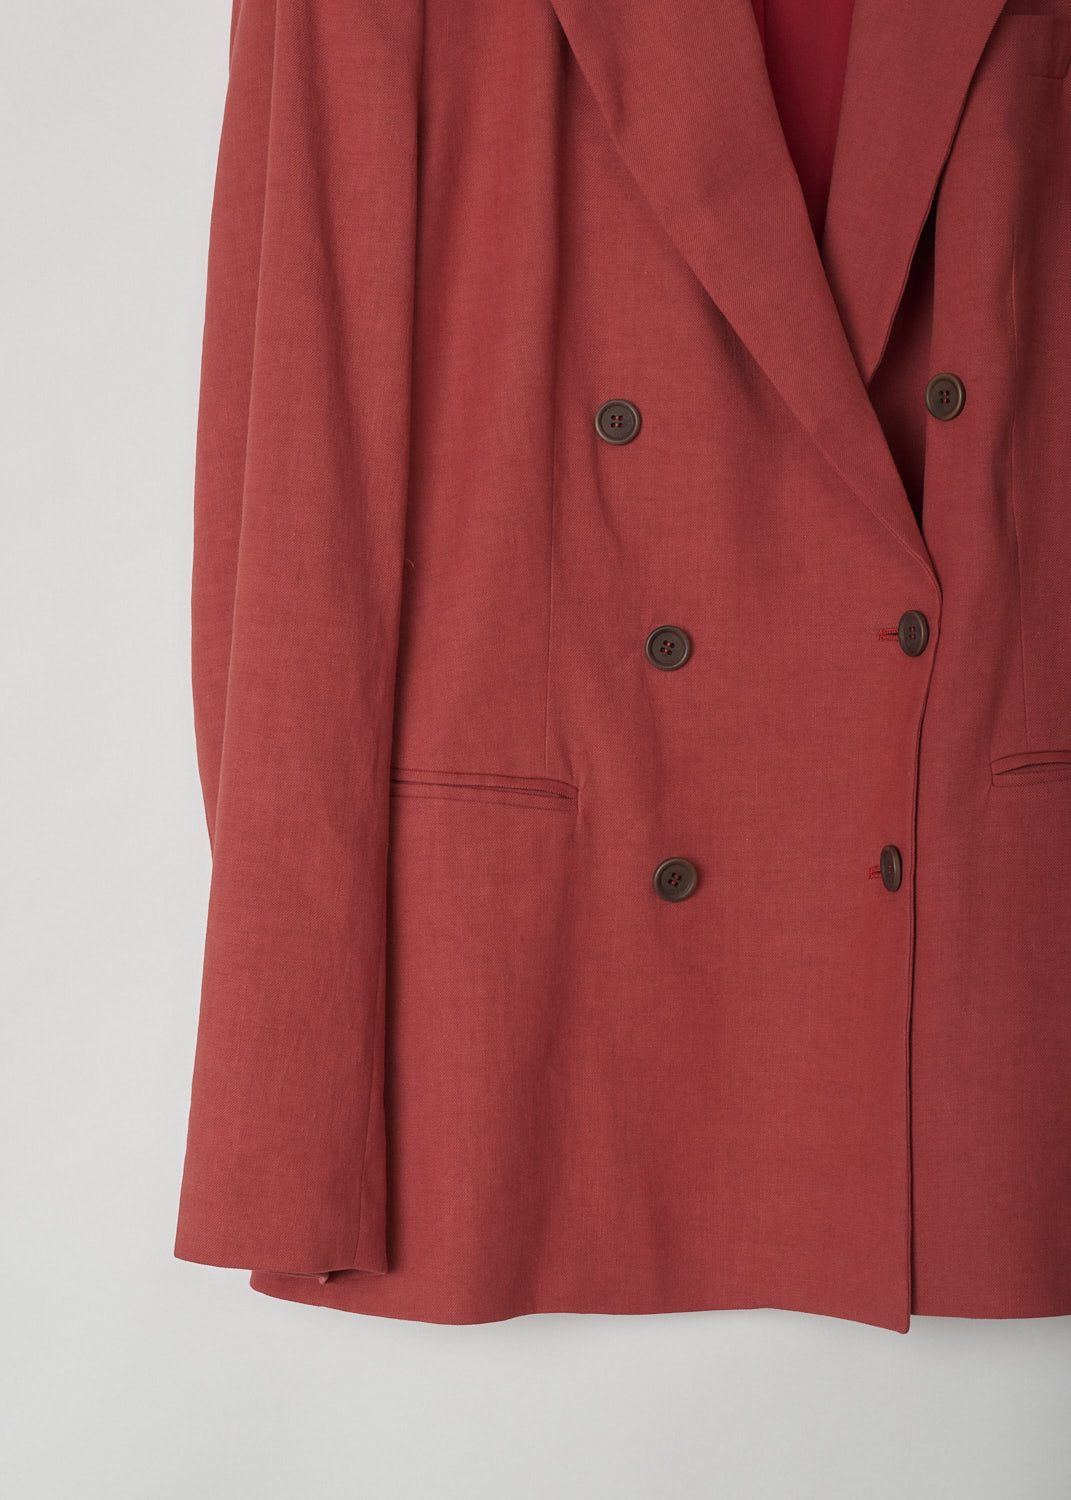 BRUNELLO CUCINELLI, DOUBLE BREASTED BLAZER IN MUTED RED, MF5918924_C7901, Red, Detail, This double breasted blazer in a muted red color has a notched lapel. The long sleeved have buttoned cuffs and the blazer has three pockets: two regular welt pockets and one welt breast pocket. 
